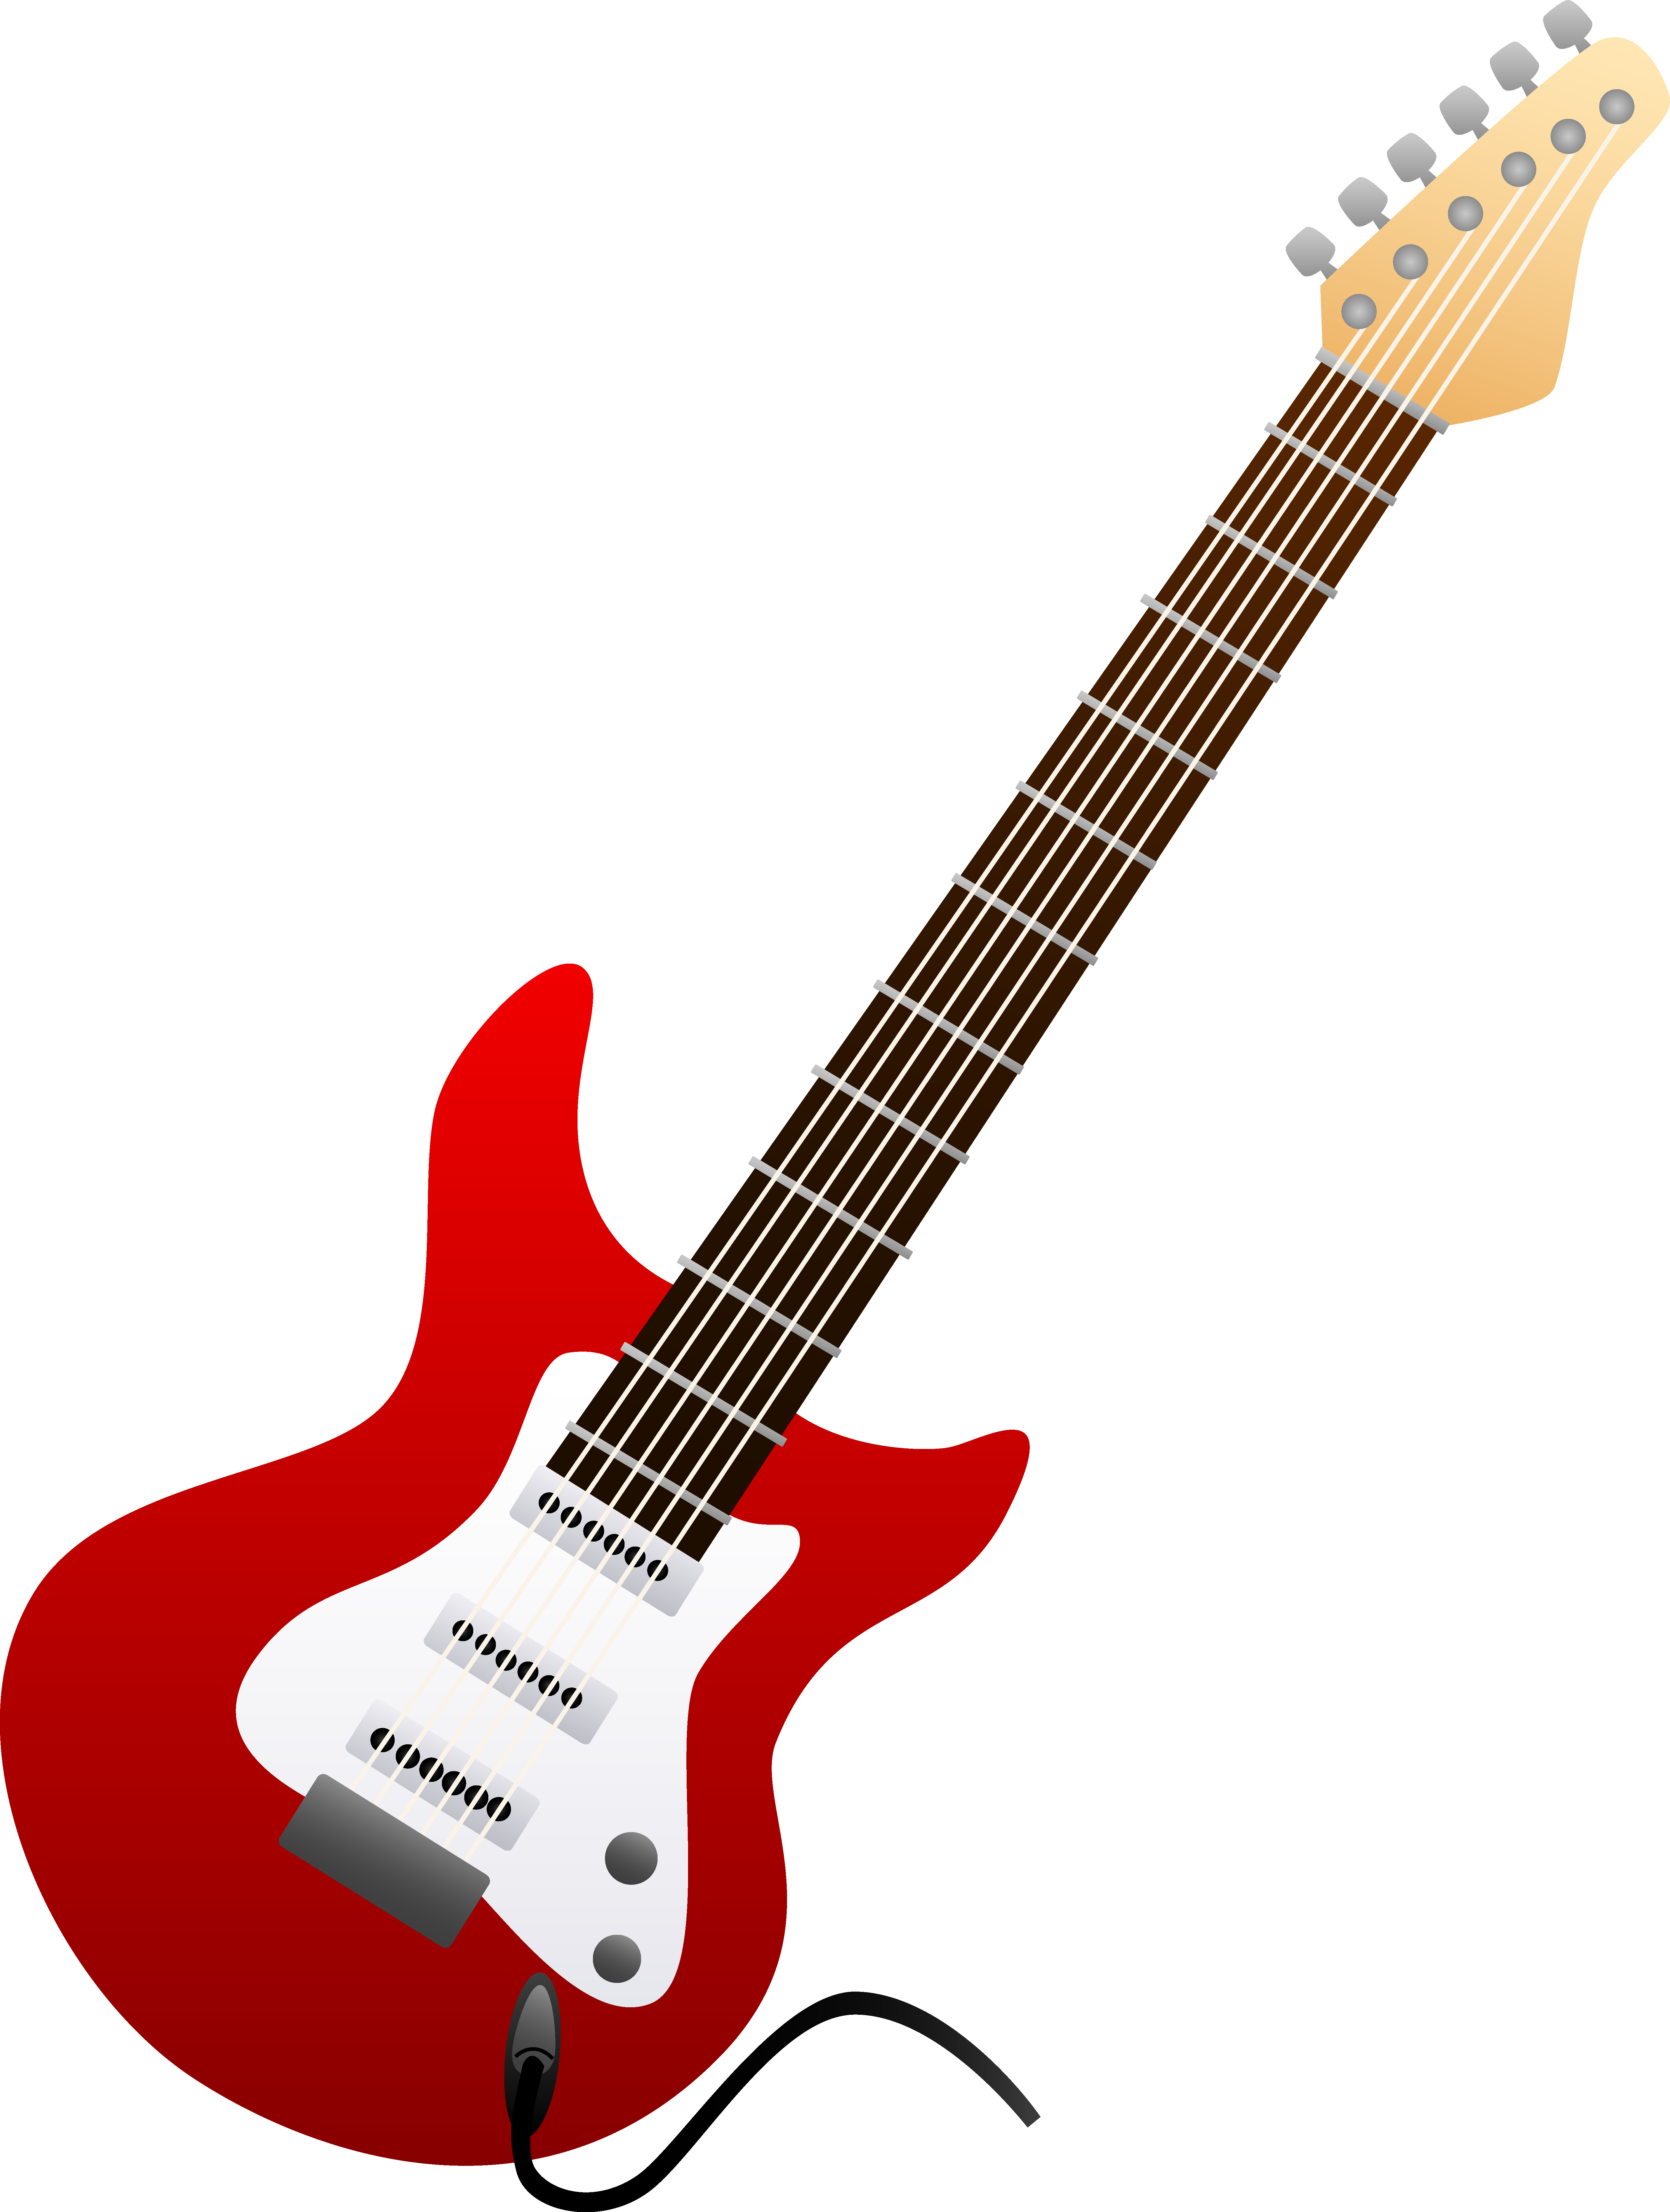 Electric Guitar Red image - vector clip art online, royalty free 